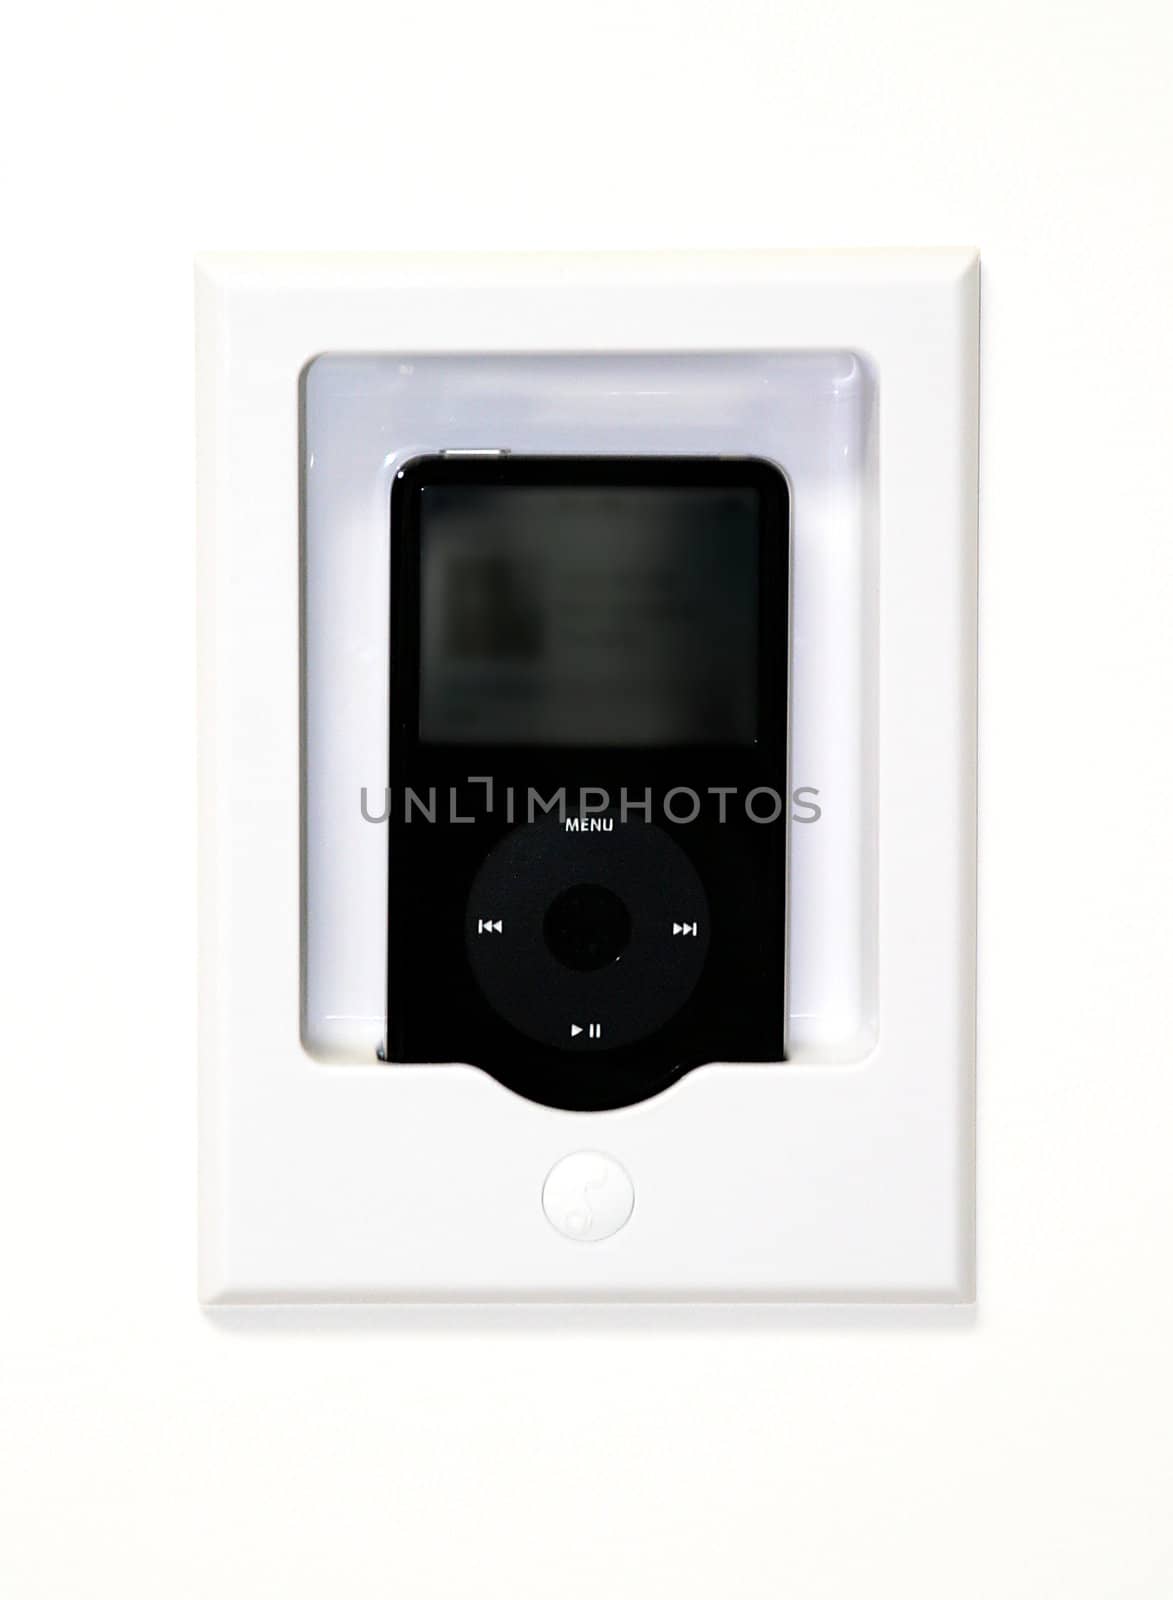 Black mp3 player in a white wall mounted station.